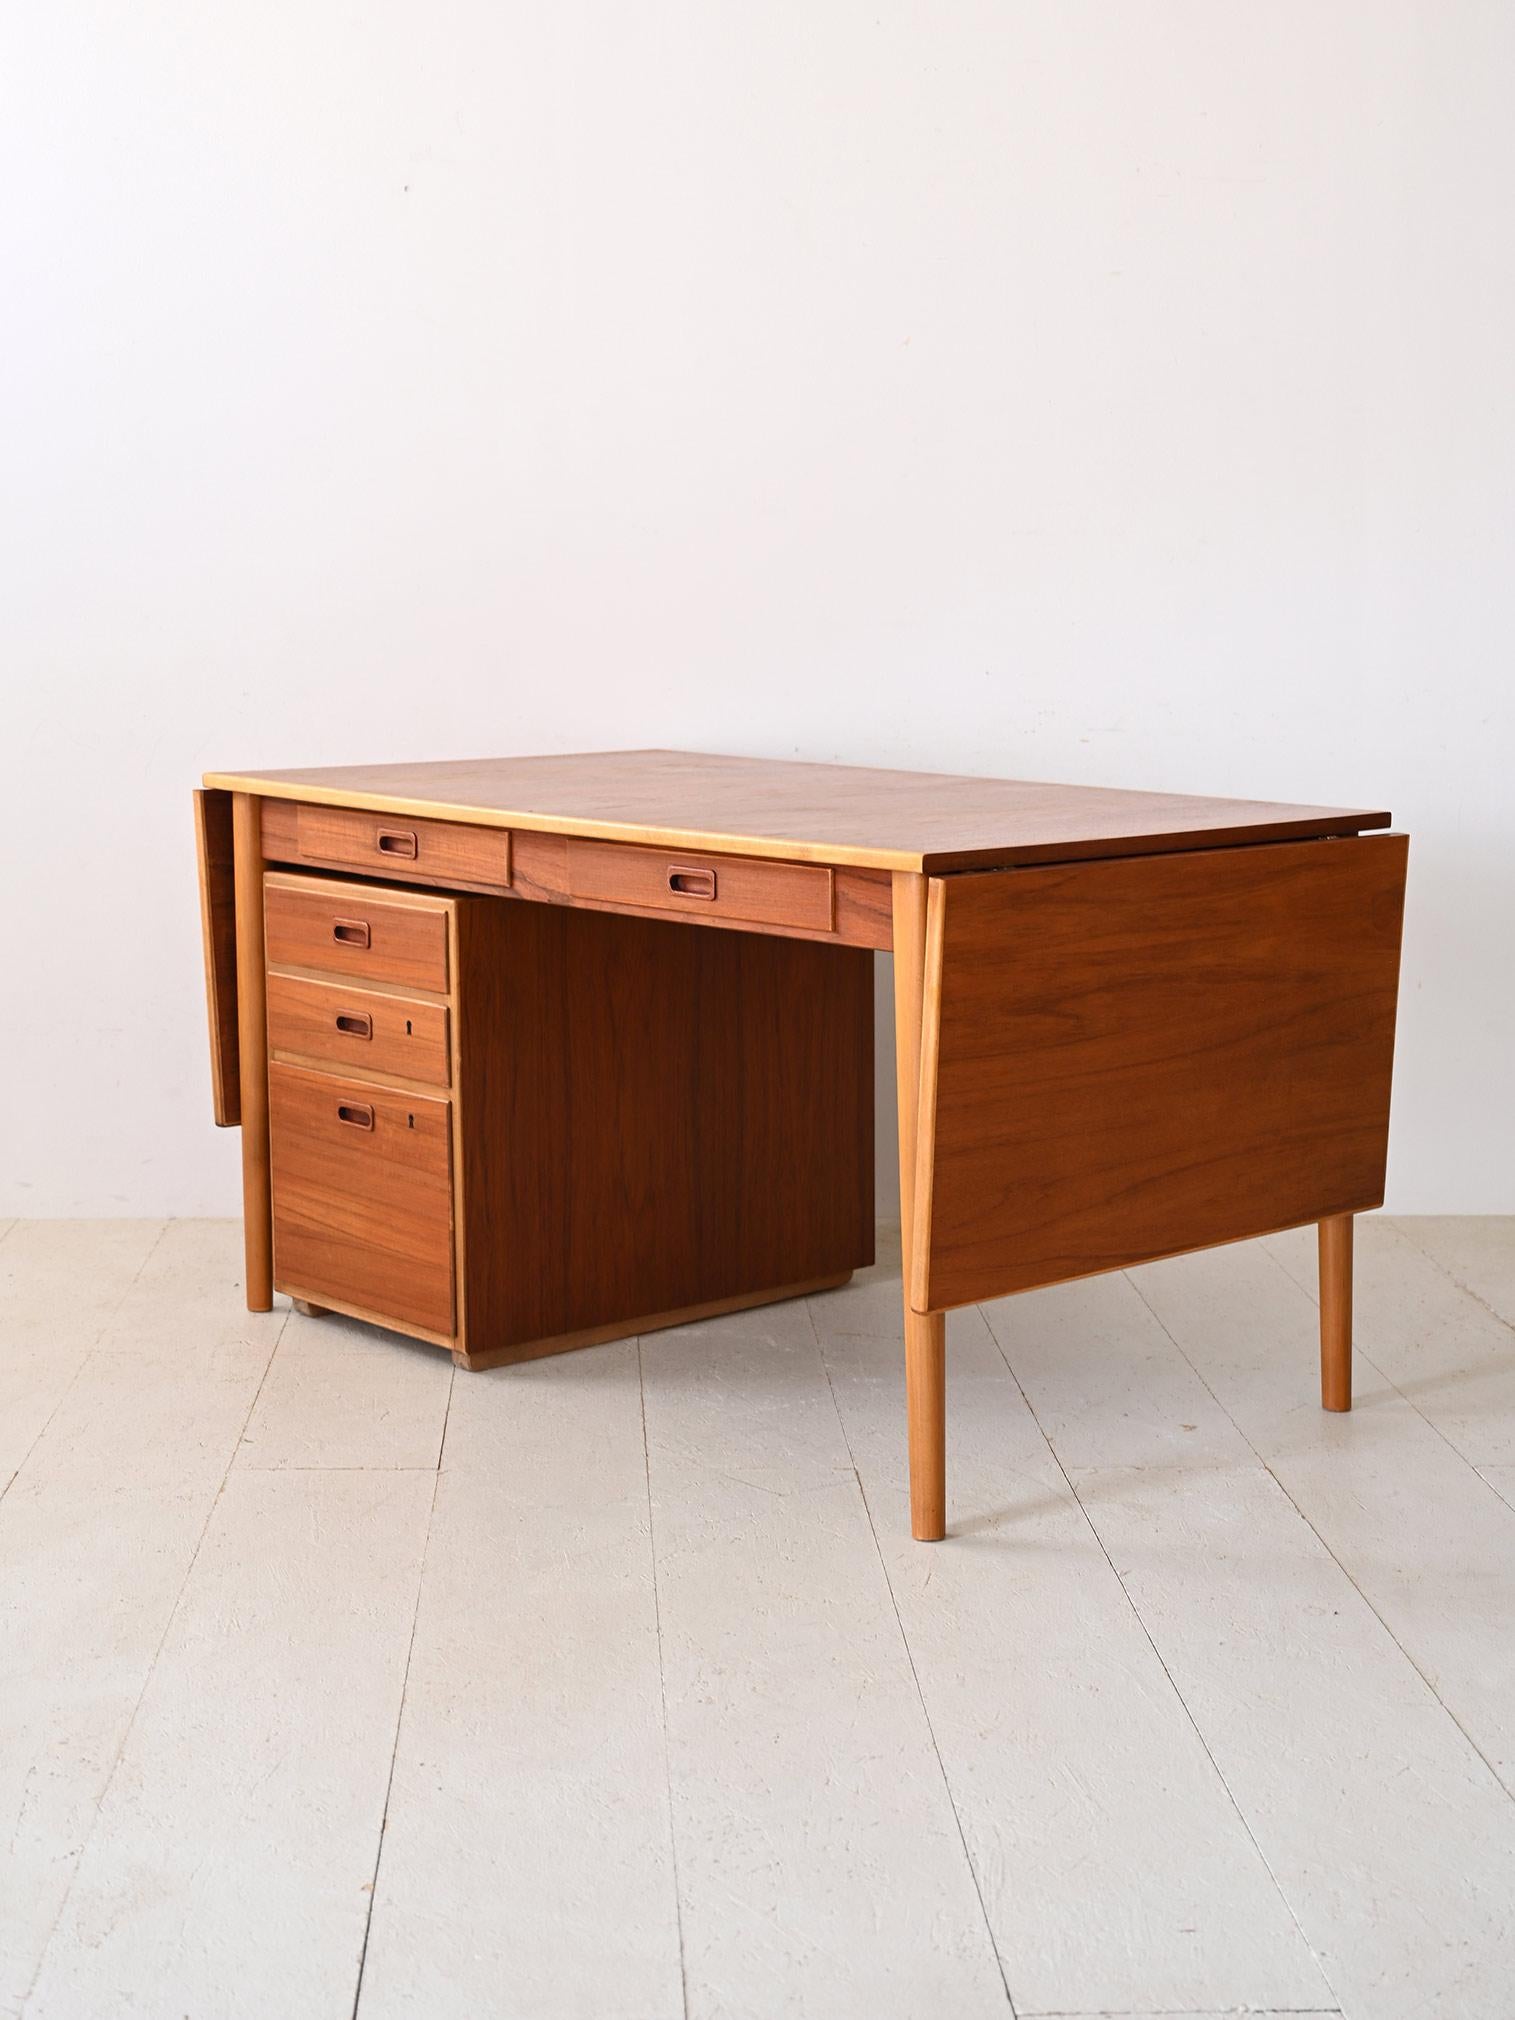 Teak Retro desk by Nils Jonsson with drawers For Sale